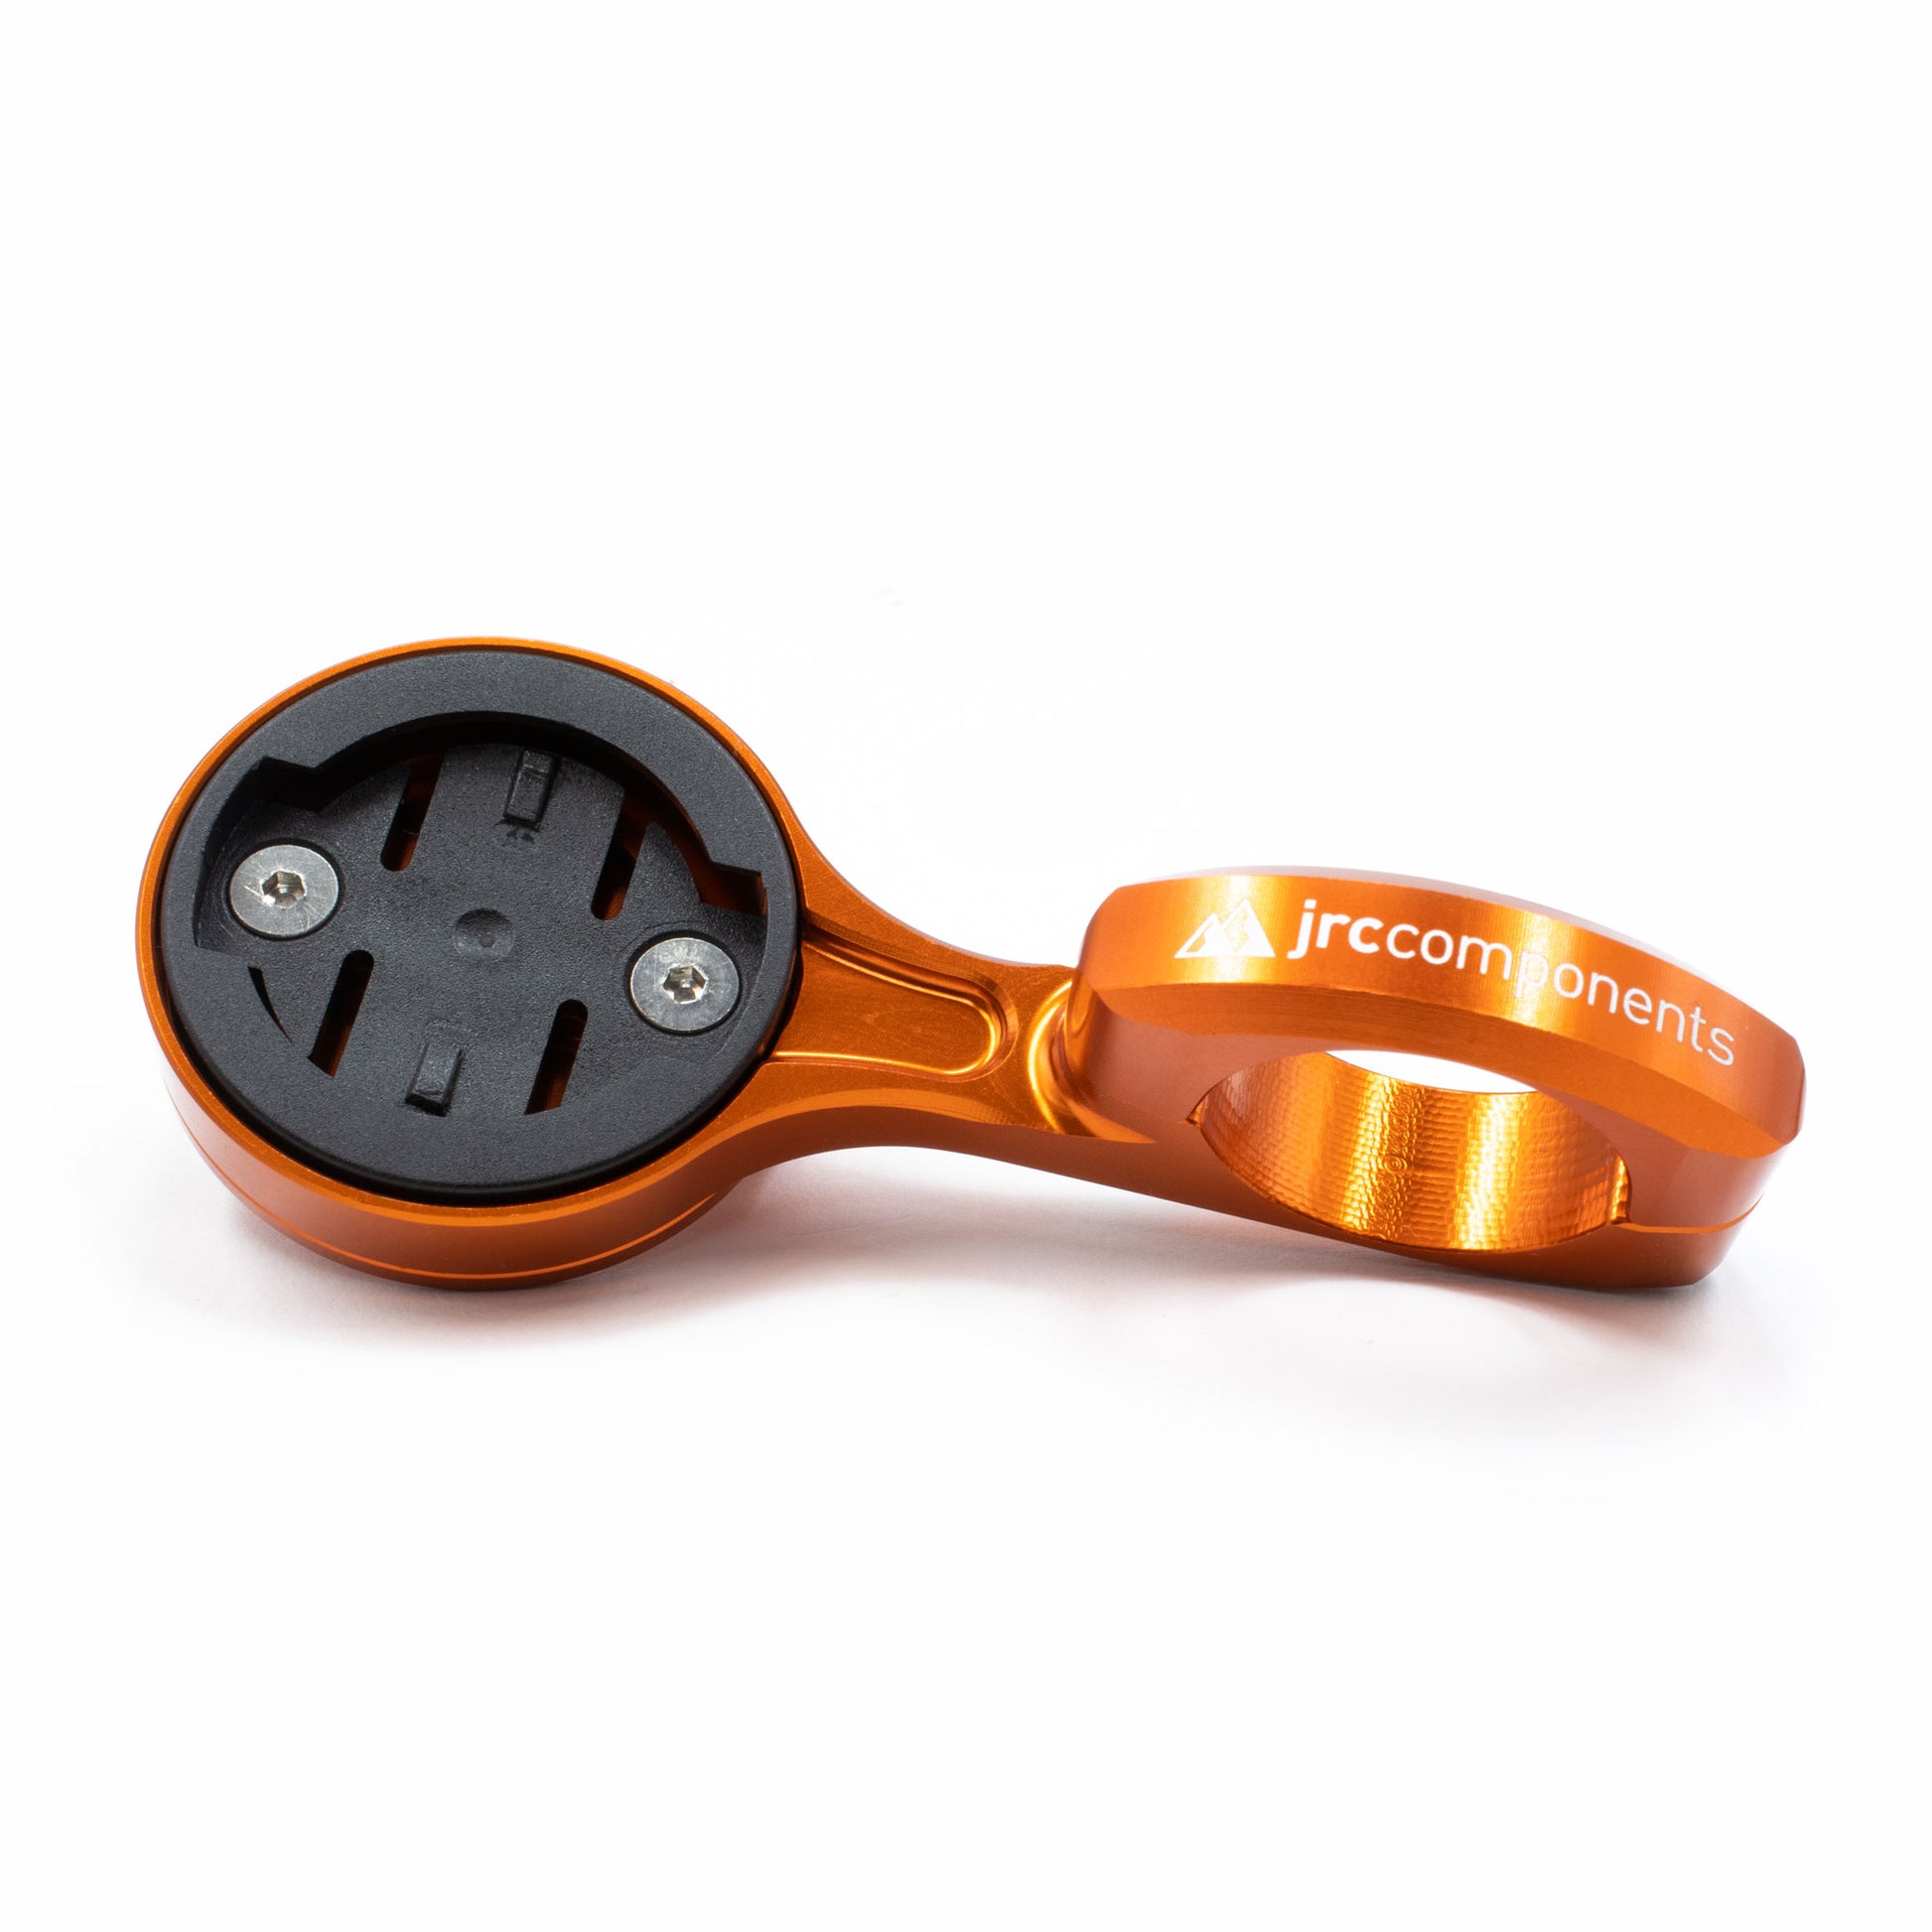 Orange, lightweight, aluminium Wahoo GPS computer mount for Time Trial and Triathlons, TT, with compact flick-switch design